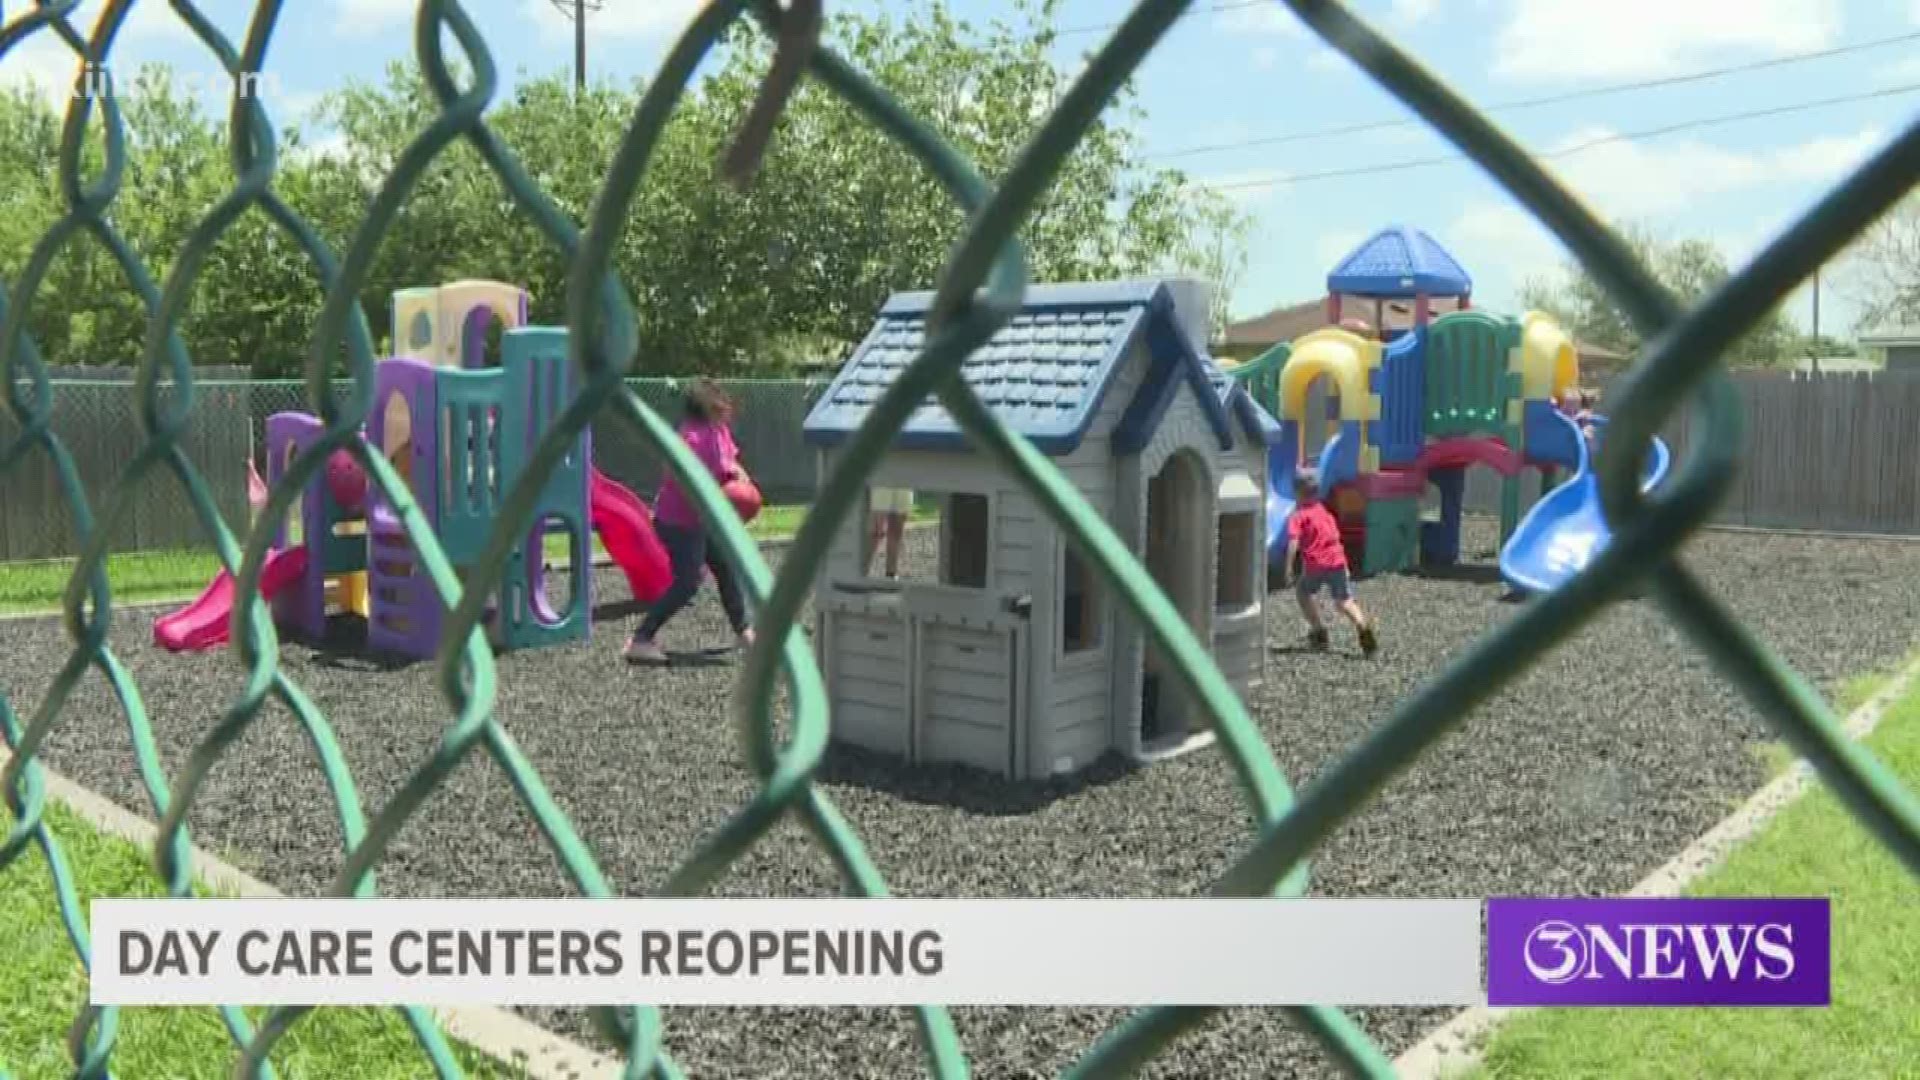 As more parents return to work, more young children are filling up child care facilities in the area.